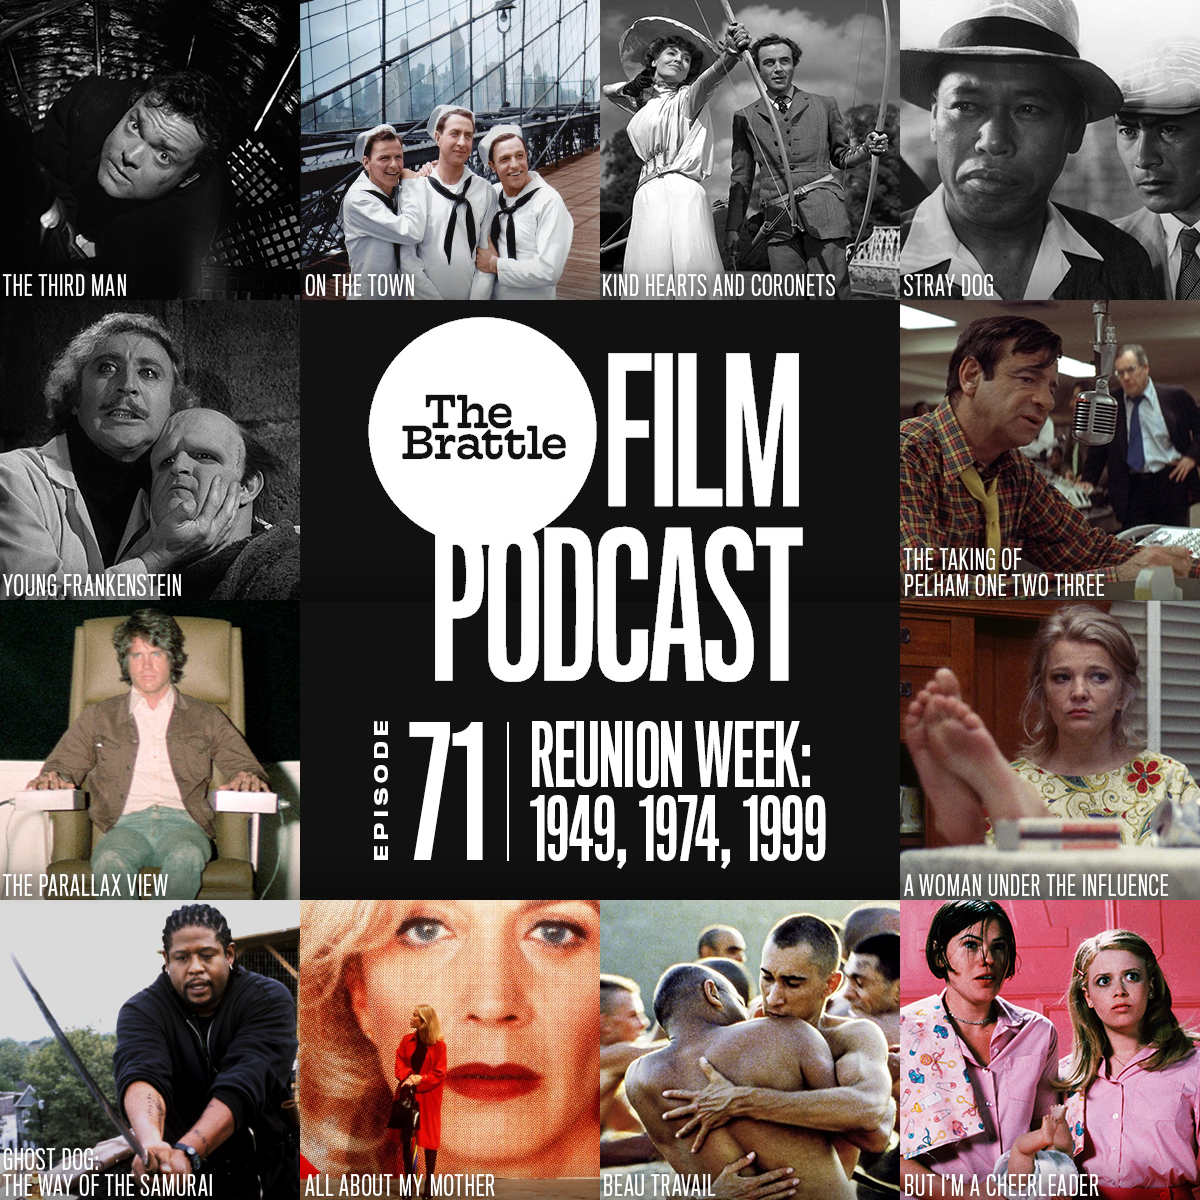 We kick off Season 5 of The Brattle Film Podcast by highlighting films celebrating 25th, 50th & 75th anniversaries. While our focus is mainly on the titles in our Reunion Week series, we'll also touch on many others in this wide-ranging discussion. Listen: brattlefilm.org/2024/05/20/pod…